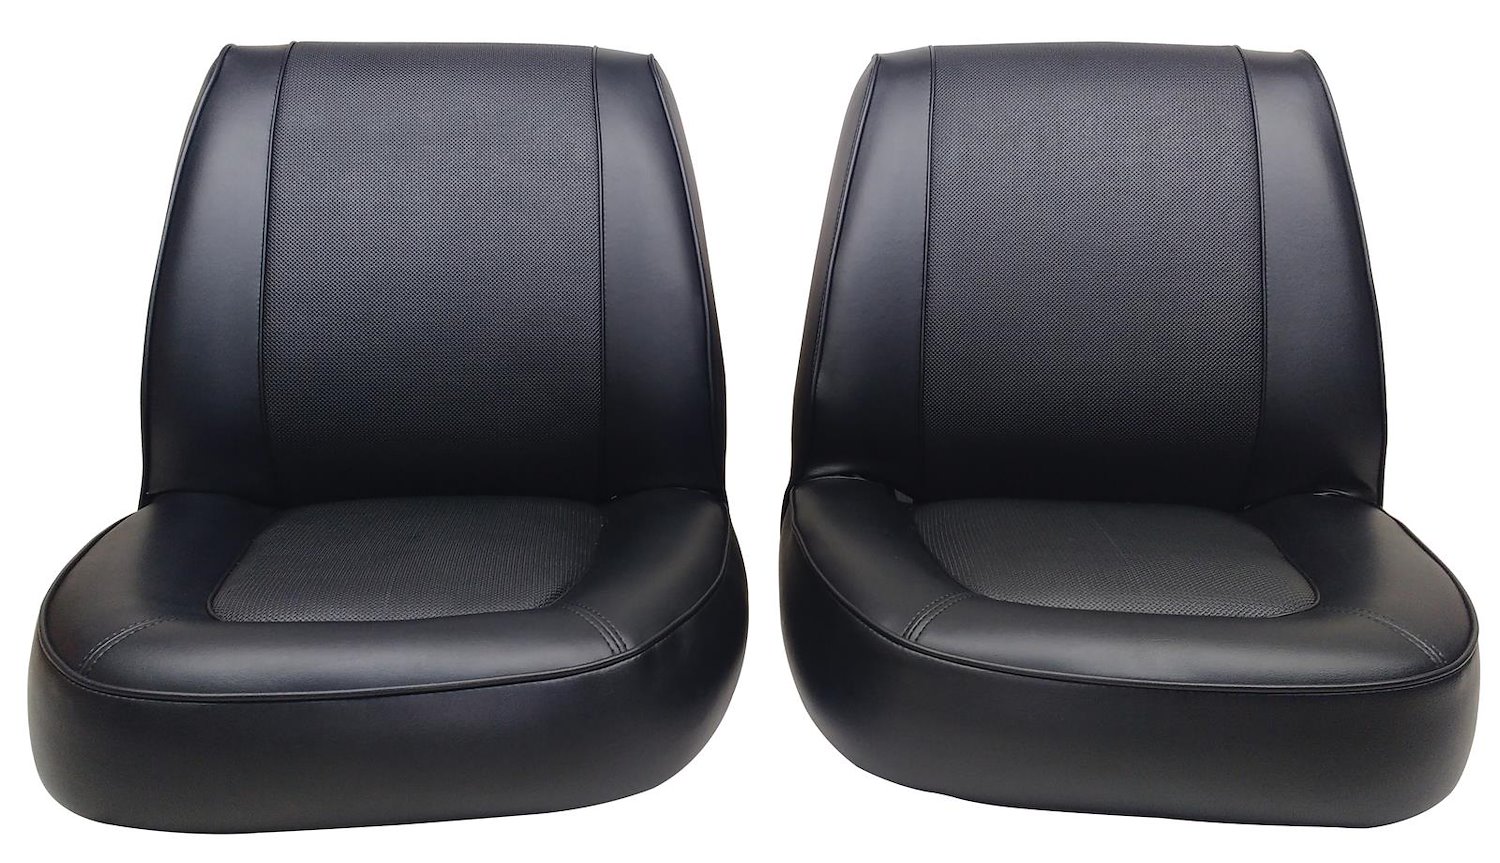 1966 Chevrolet Chevelle Malibu, El Camino and Super Sport Two-Tone Interior Front Bucket Seat Upholstery Set